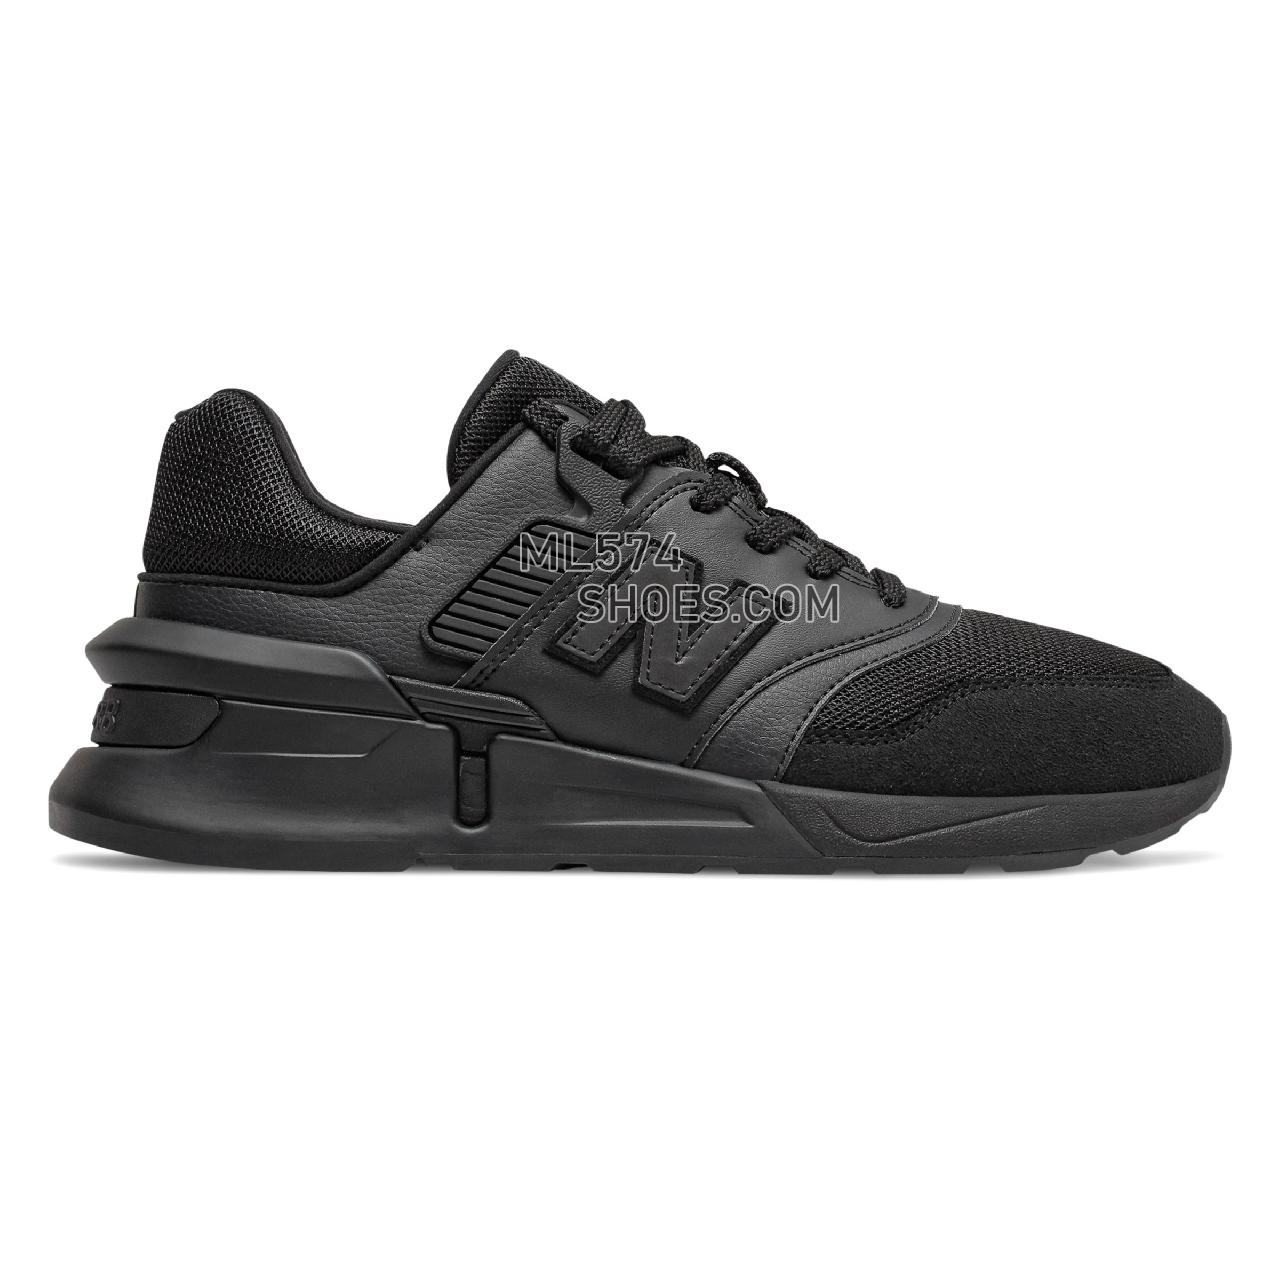 New Balance 997 Sport - Men's Sport Style Sneakers - Black Plum with Black - MS997LOP